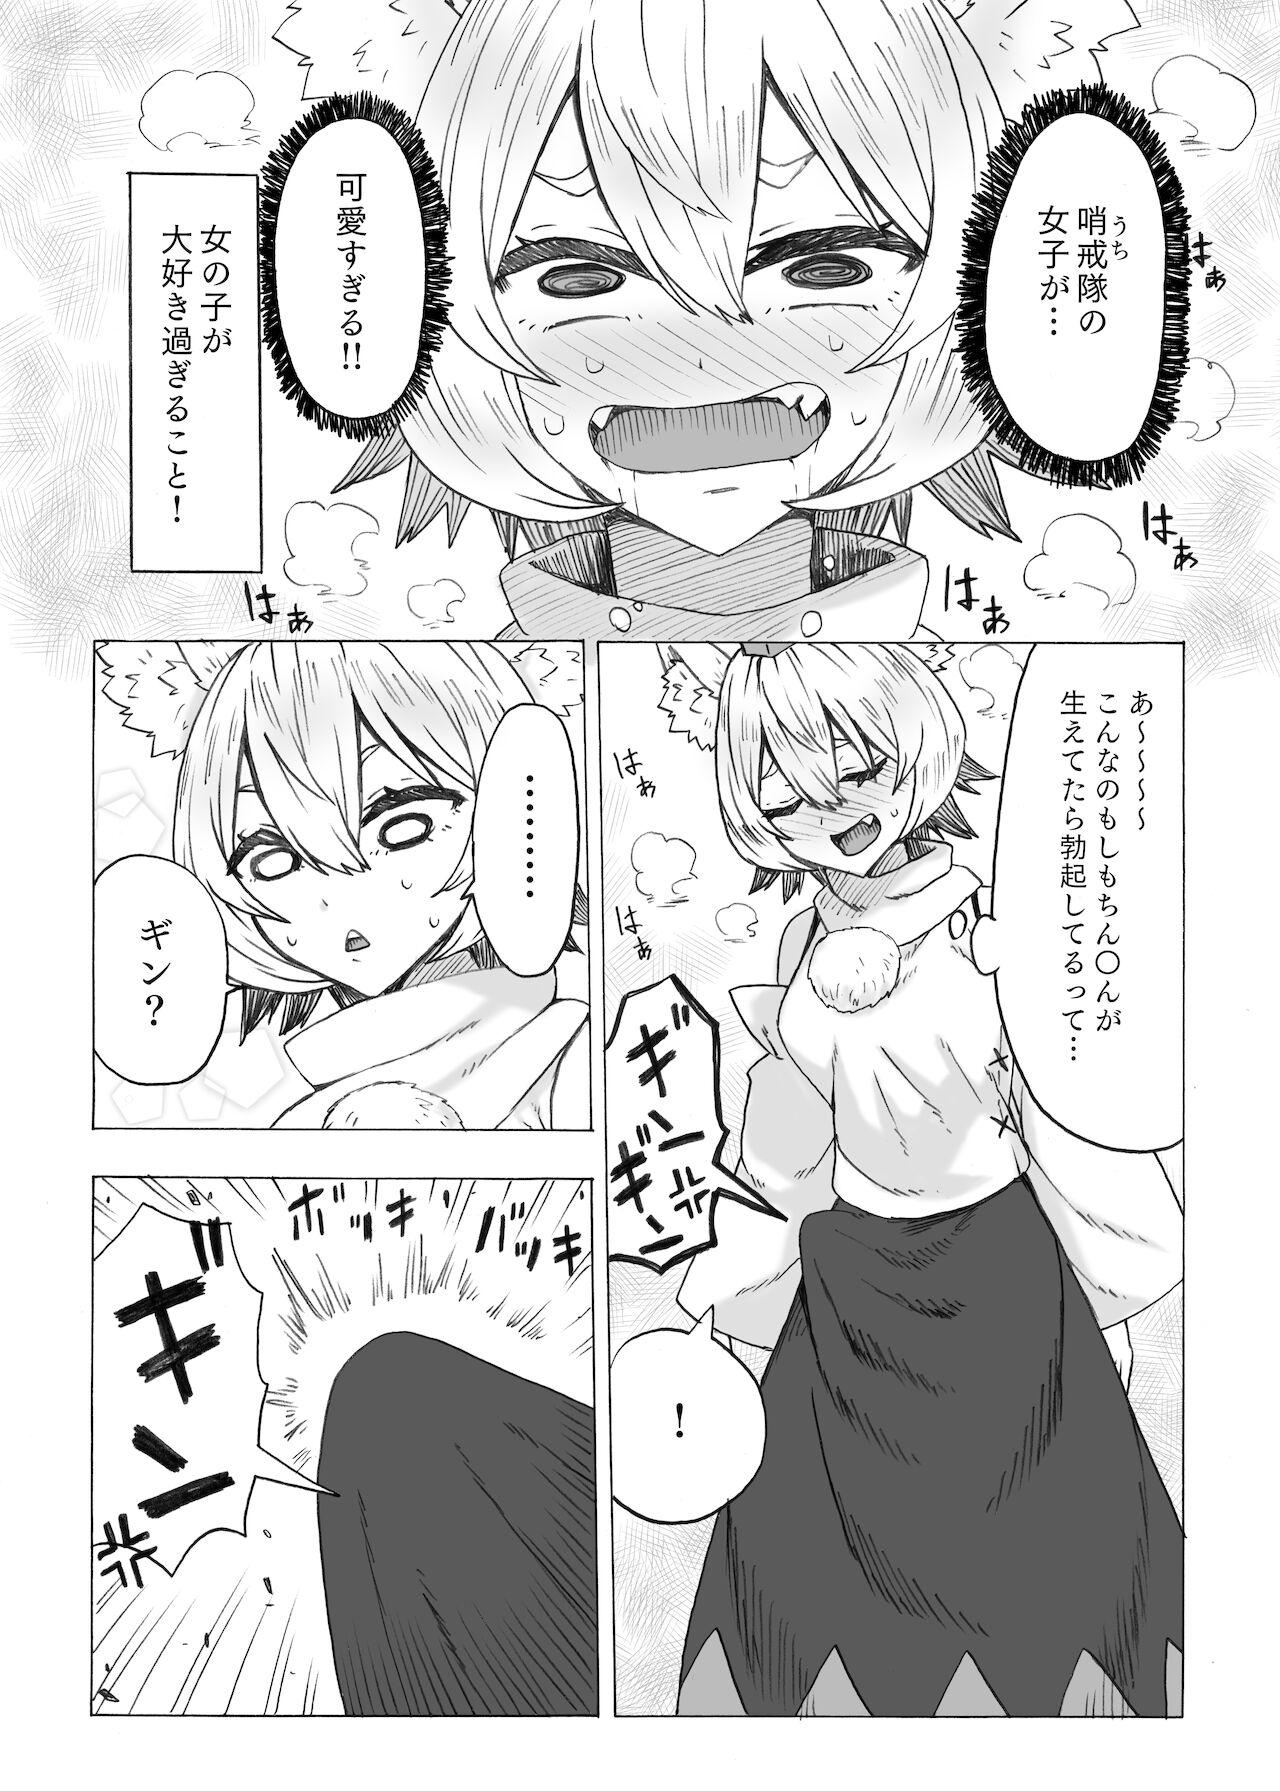 Tiny Titties ふた椛がふたりに搾り尽くされる話 - Touhou project Cum Eating - Page 4